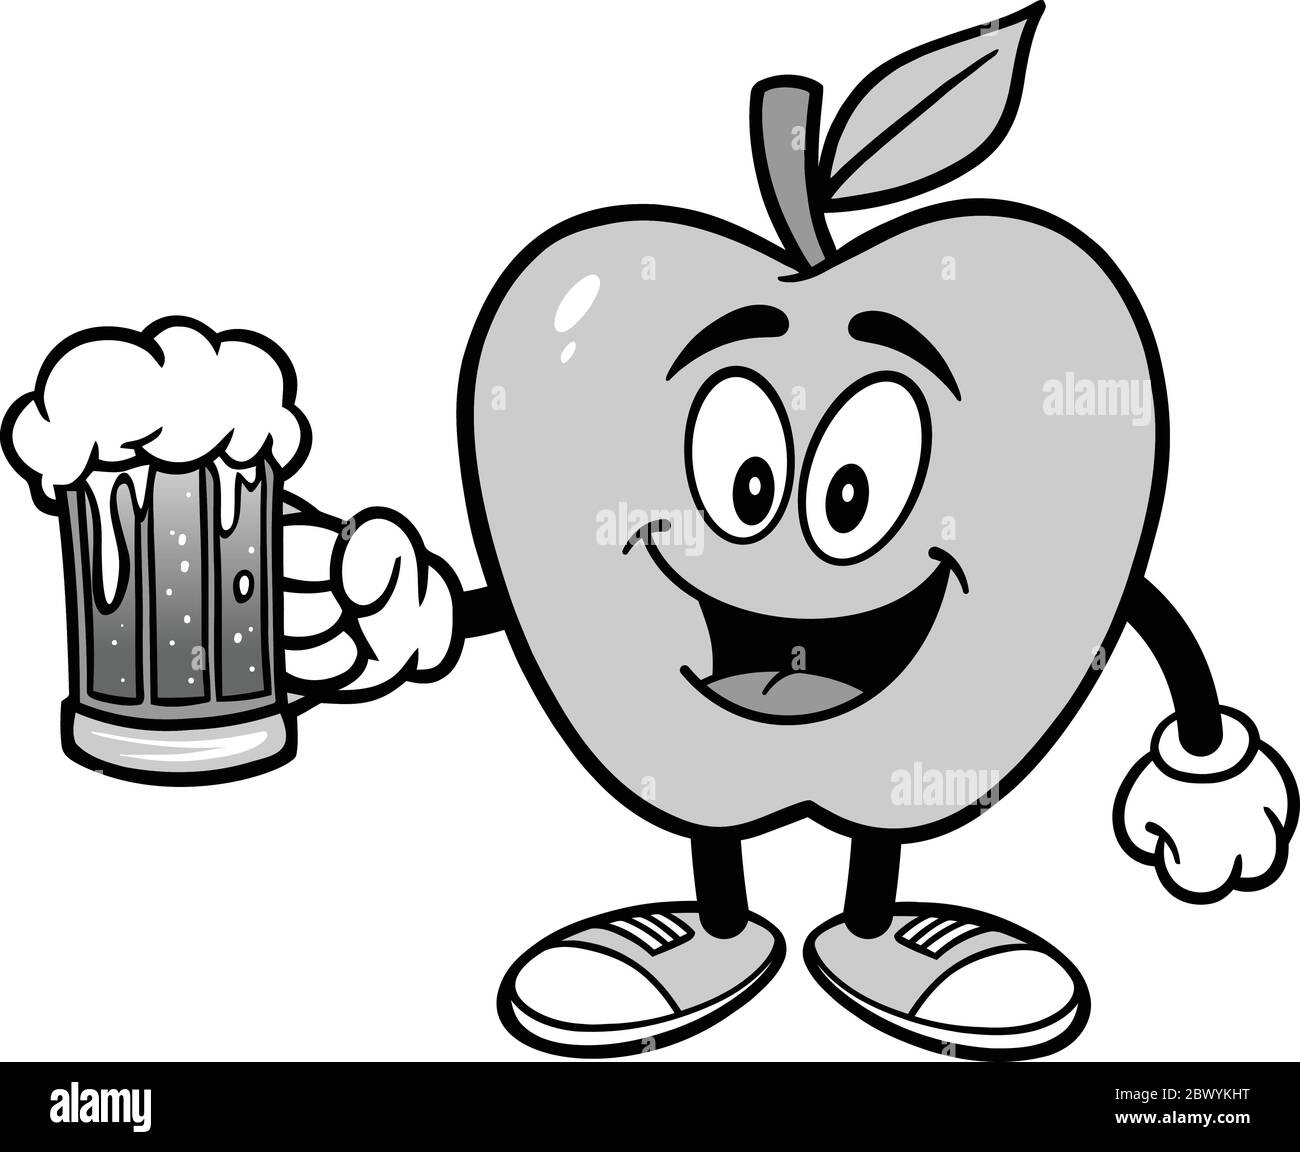 Apple Mascot with Beer - A cartoon illustration of an Apple Mascot with a Beer. Stock Vector